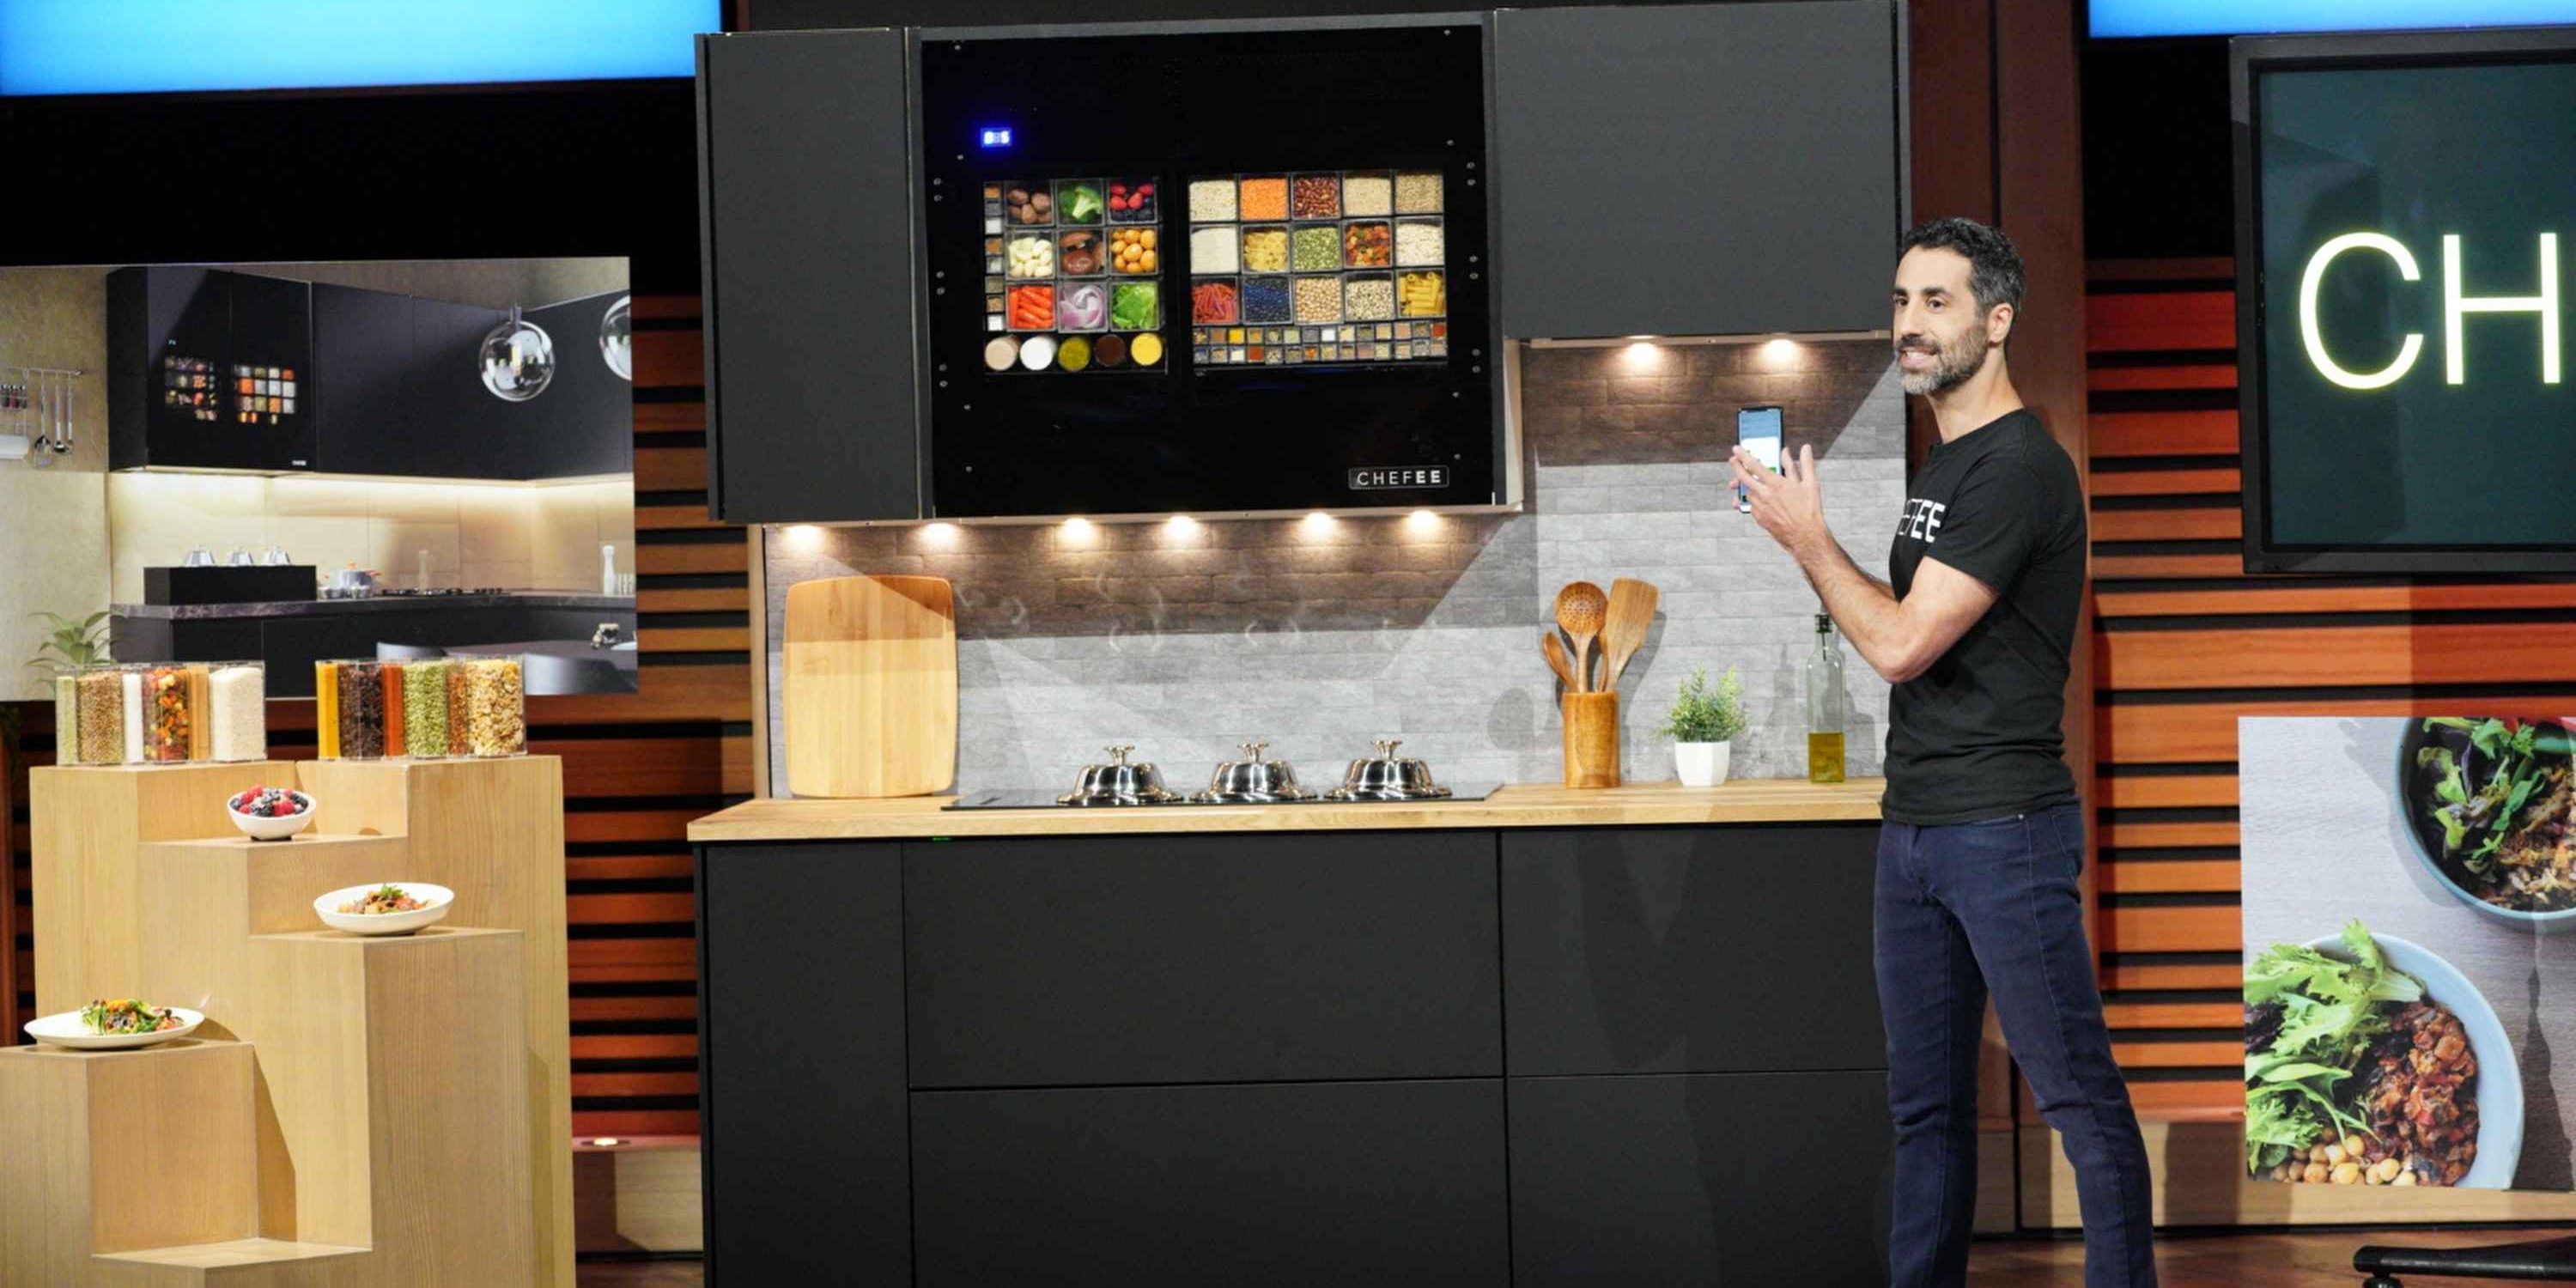 Chefee Robotics After Shark Tank: Making Hassle-Free Kitchens